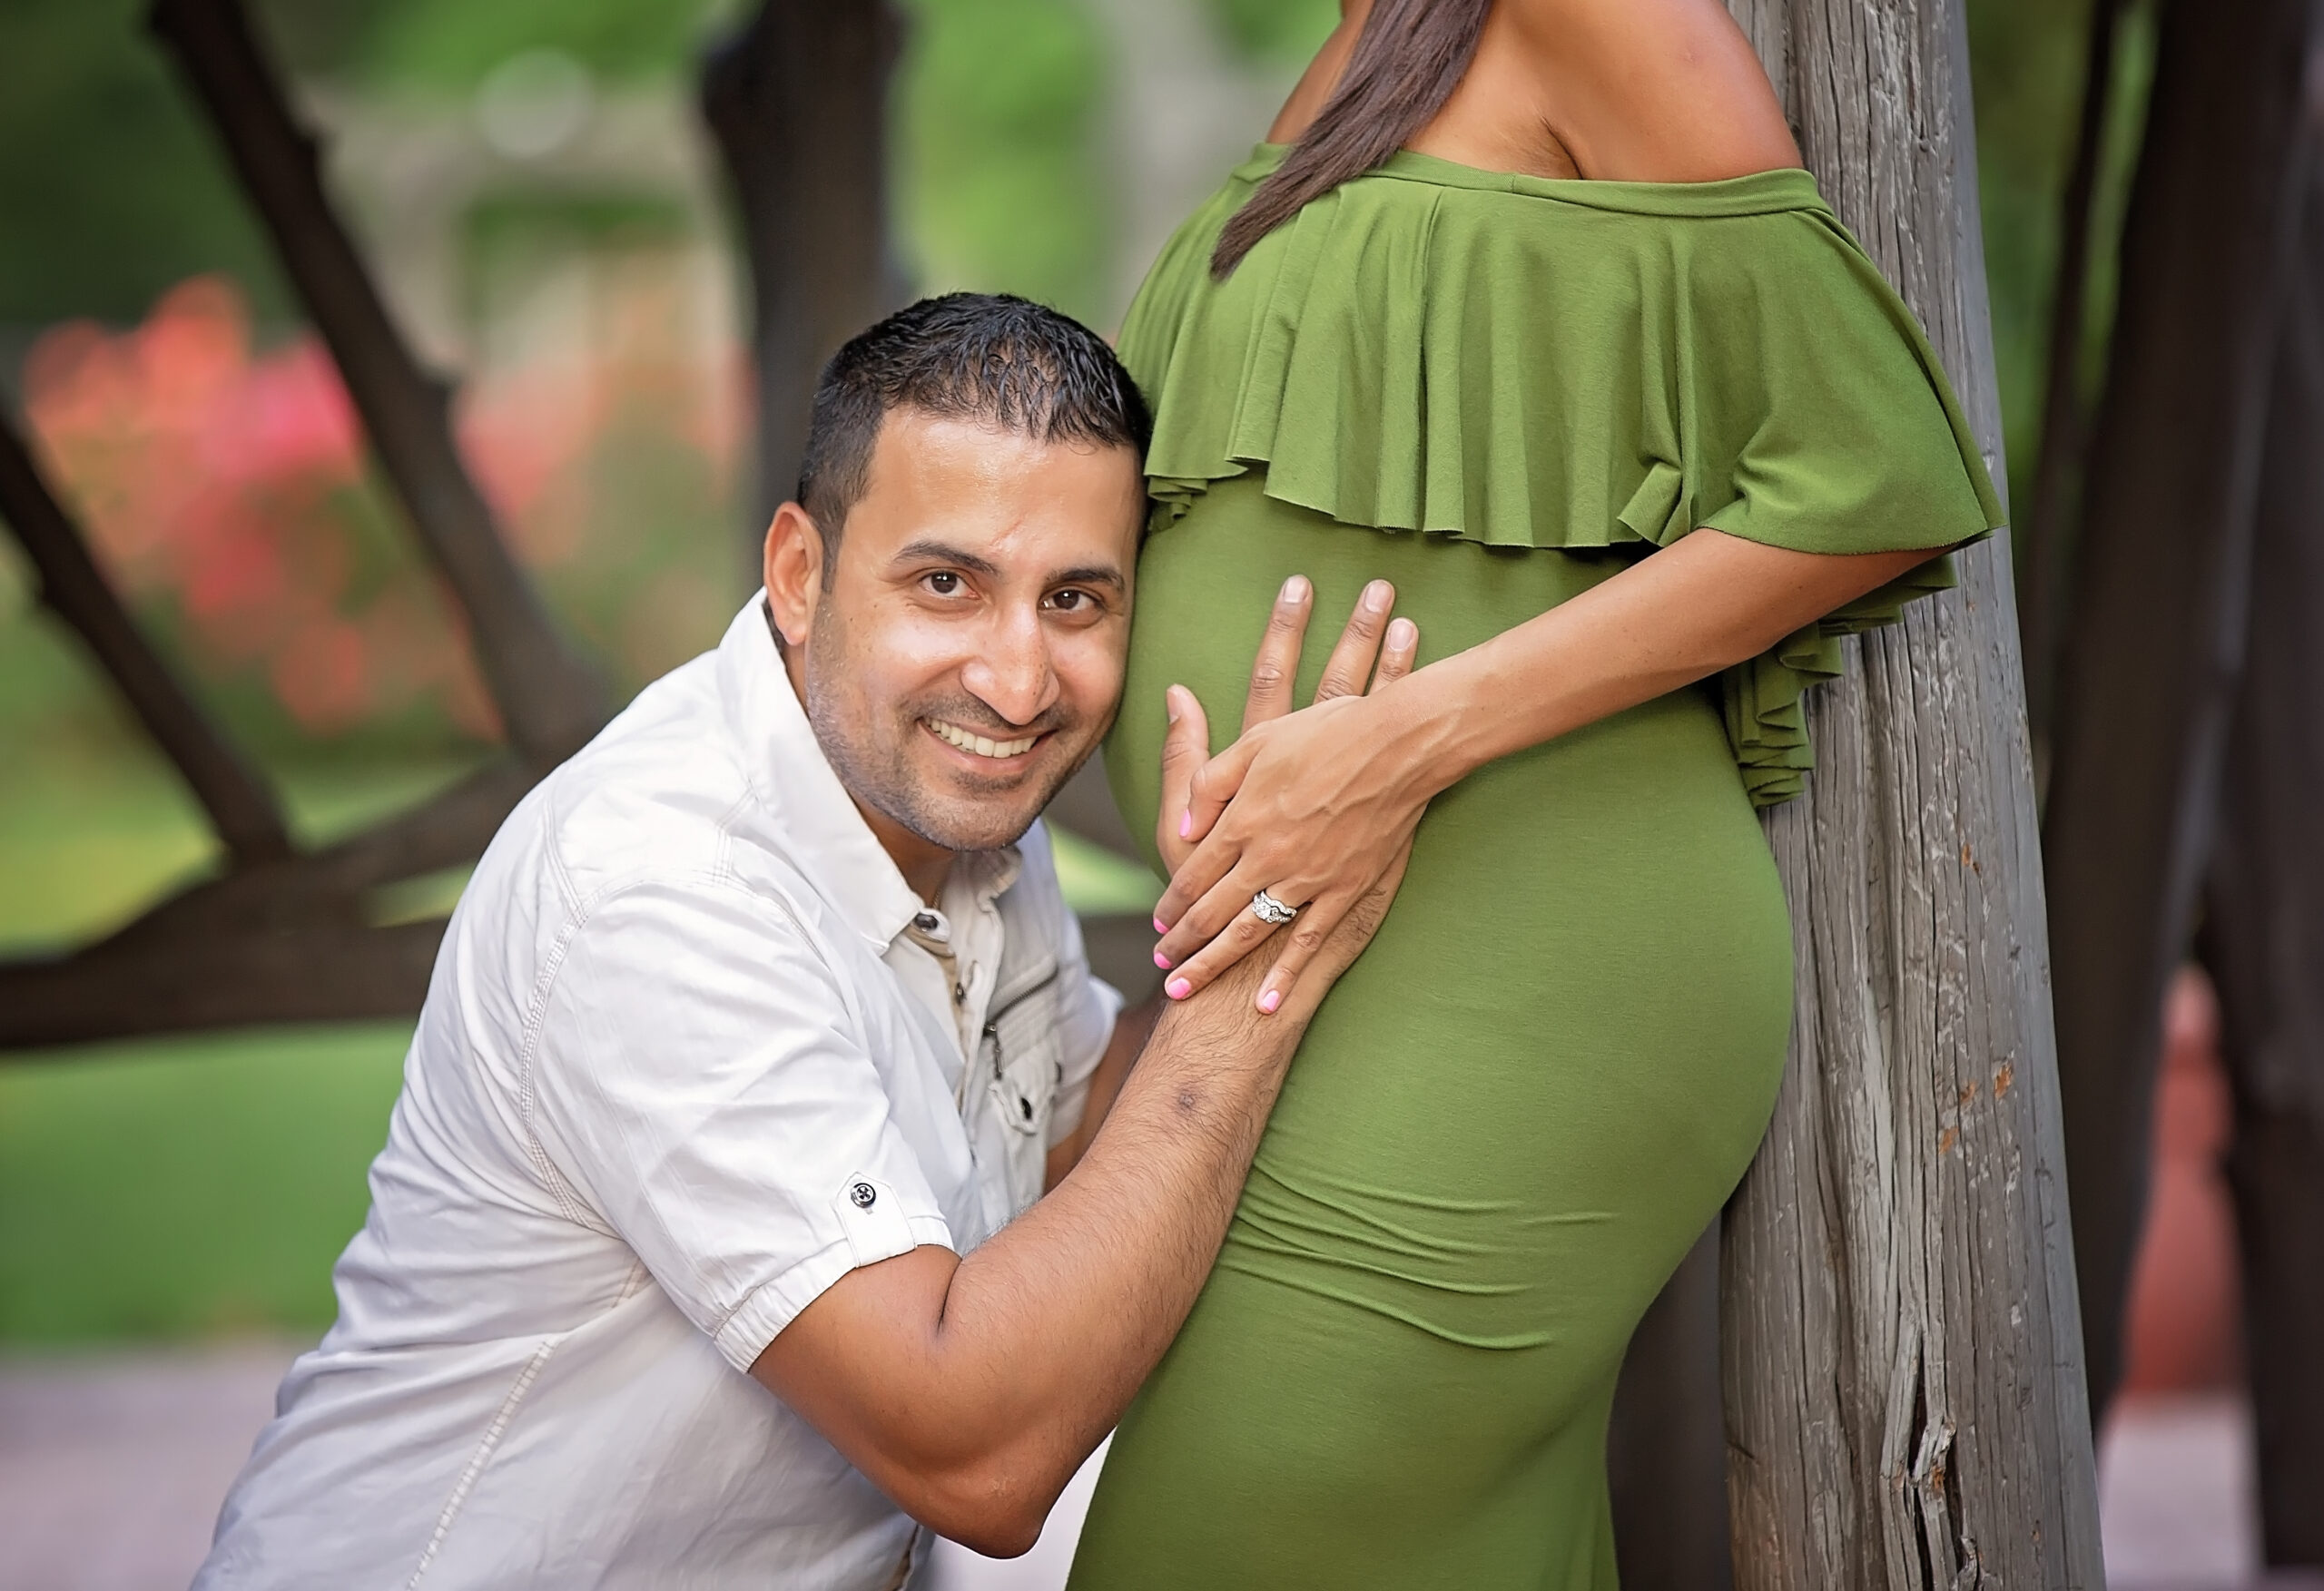 posing during maternity photo session